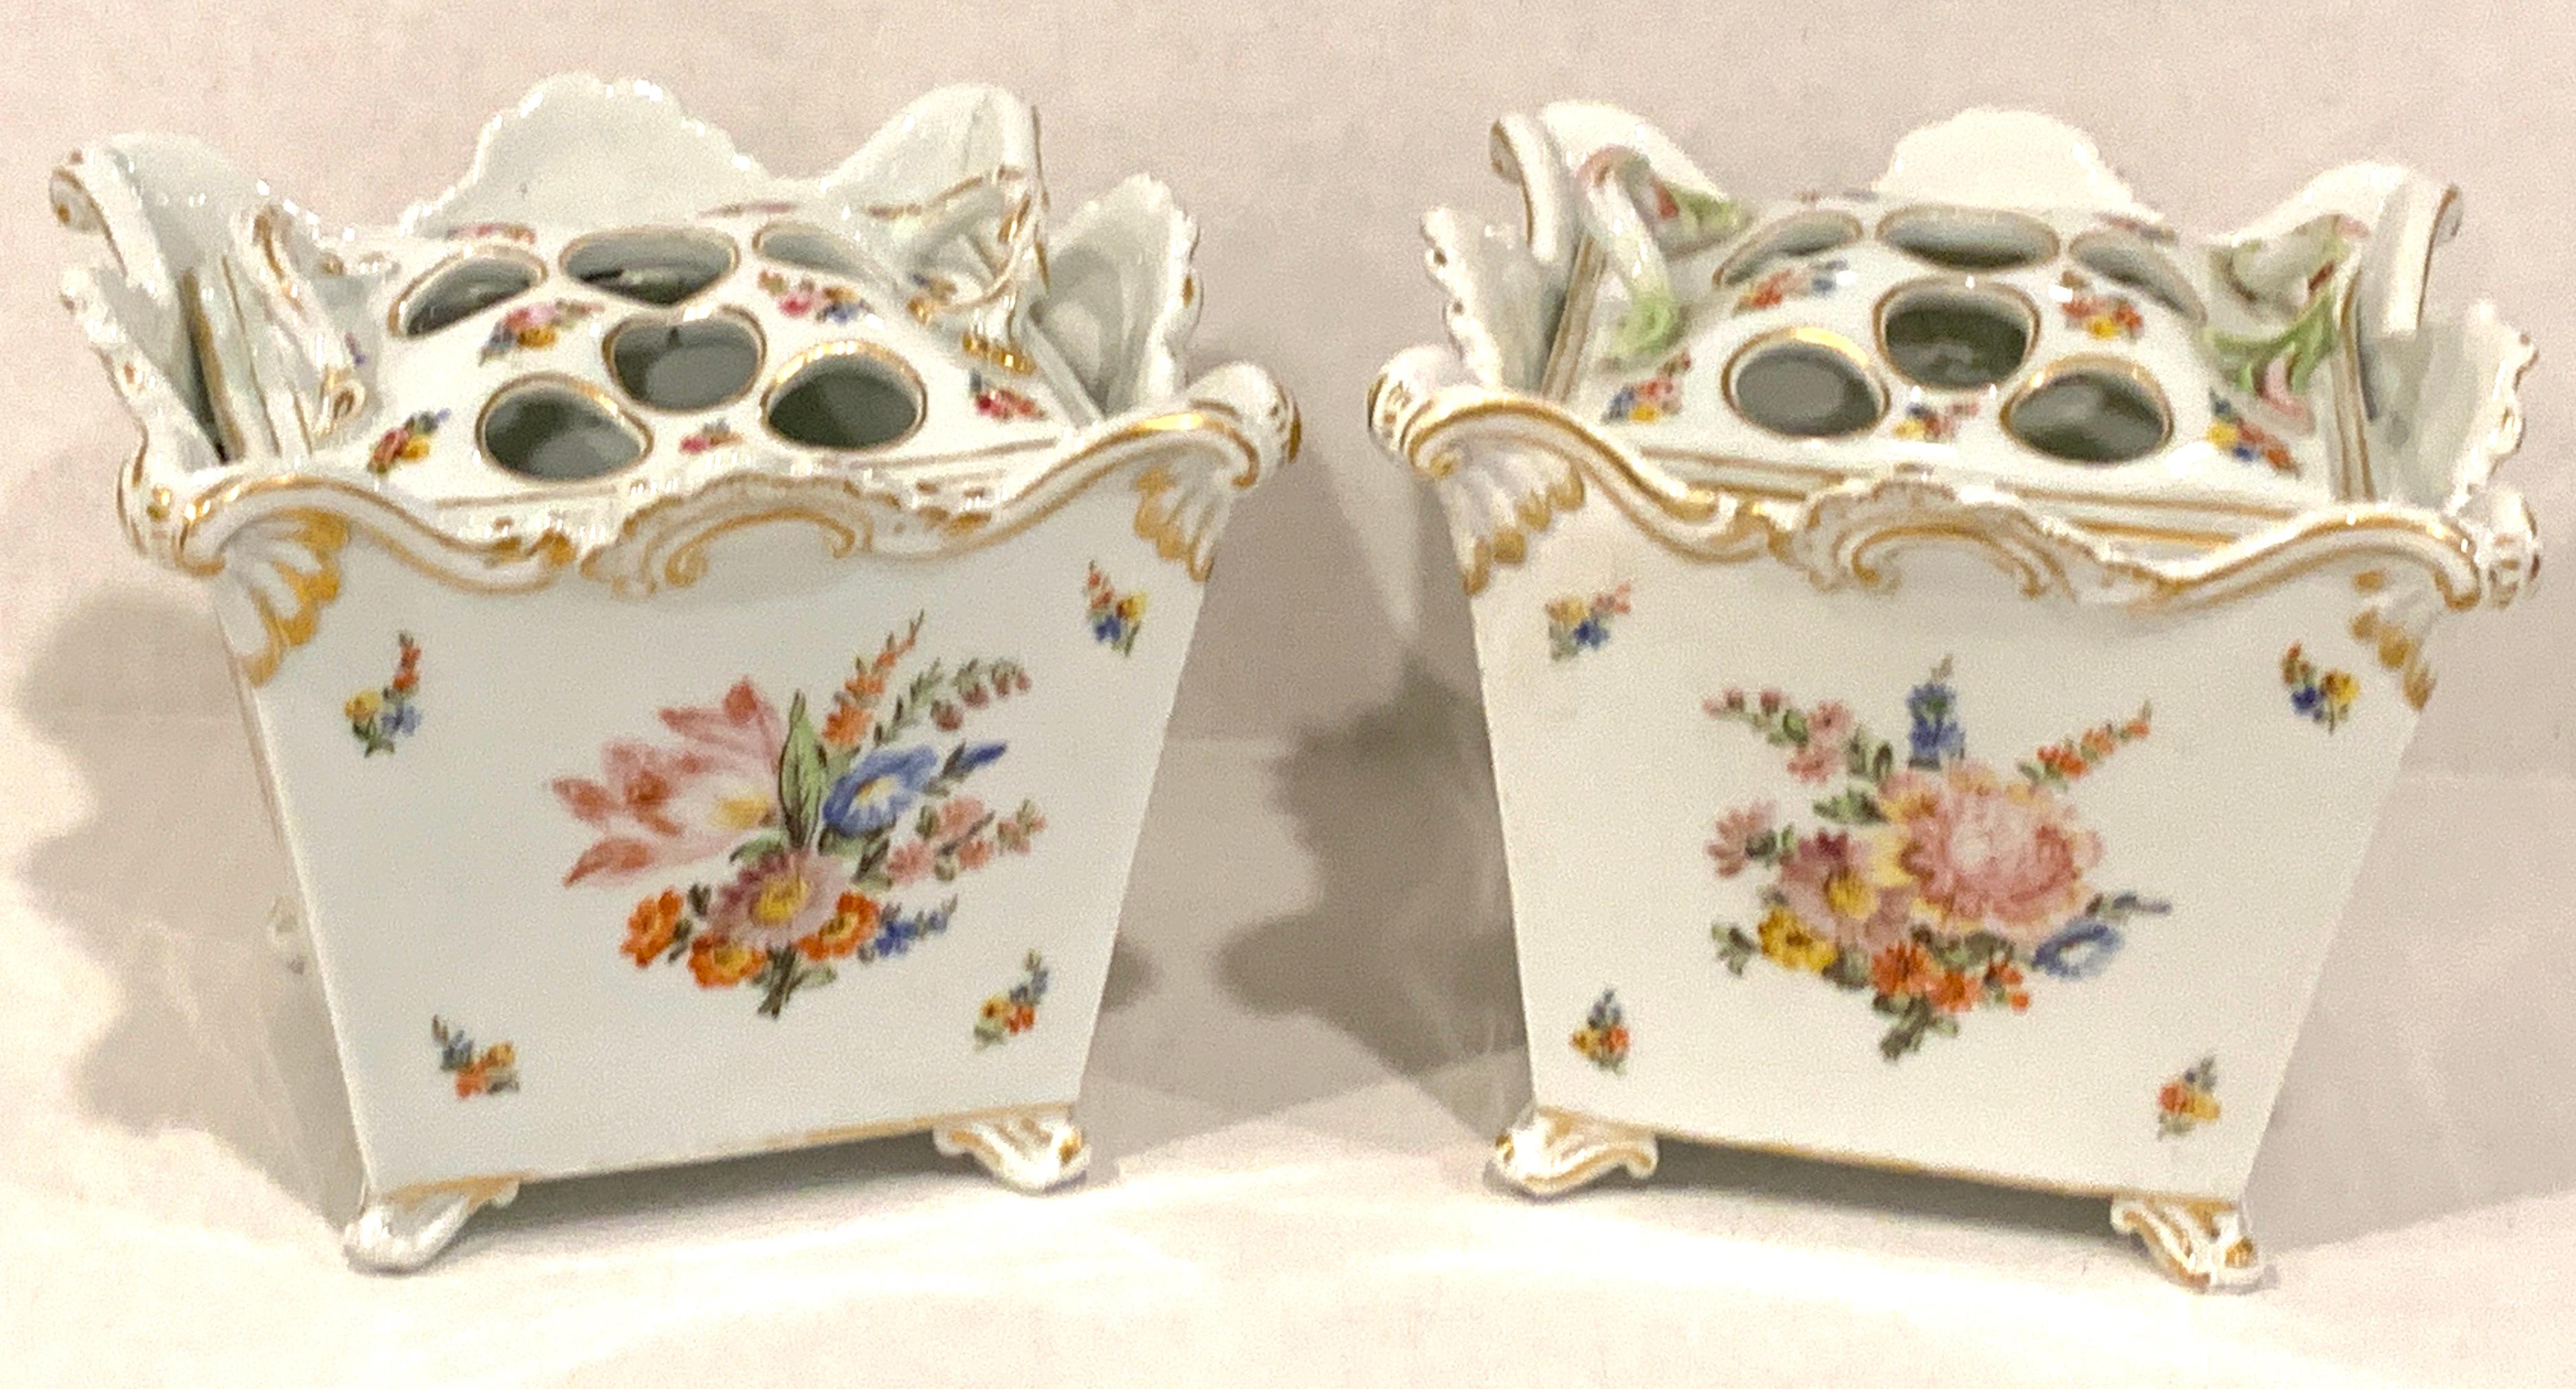 Pair of Marcolini Meissen Tulipiers, 1774-1814
Each one with a removable double handled pierced lid, raised on four interior 